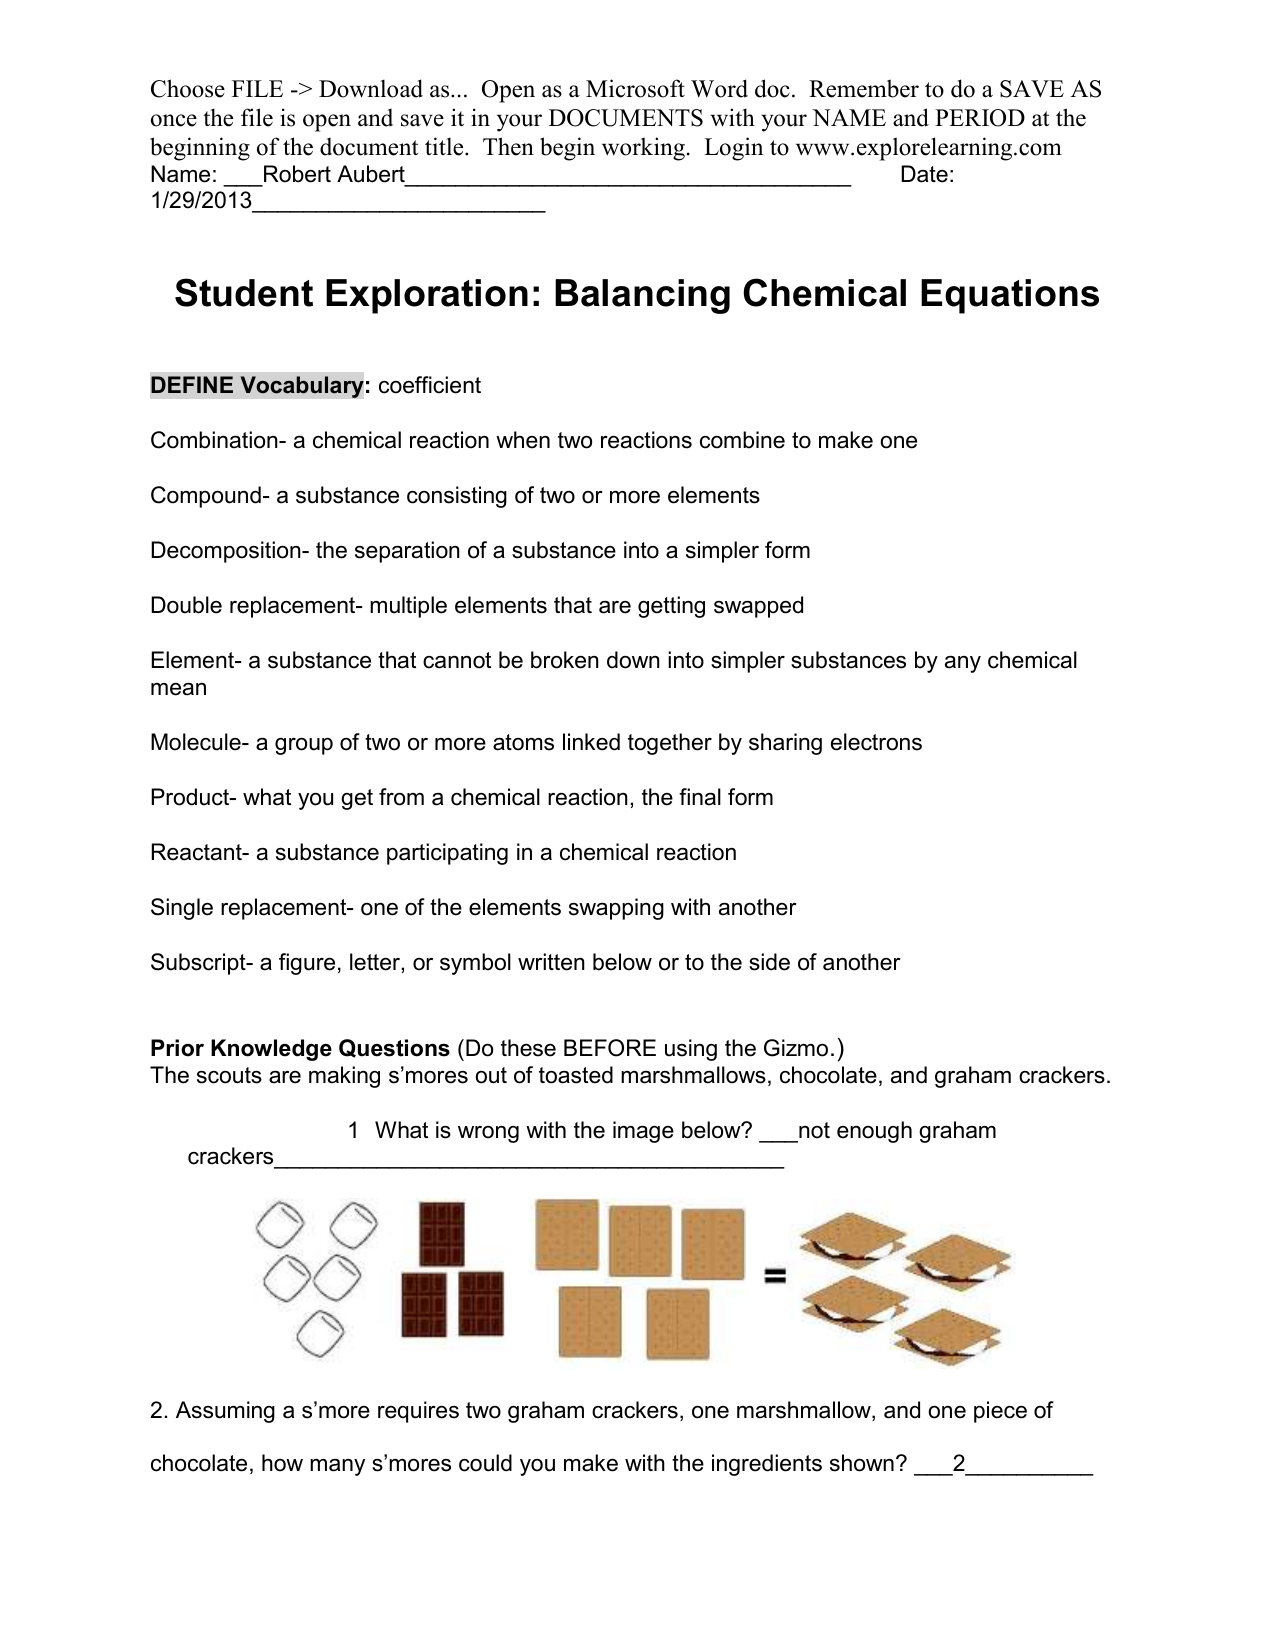 Student Exploration: Balancing Chemical Equations / Solved Activity 6 1 Student Exploration Balancing Chemi Chegg Com - A chemical equation describes what happens in a chemical reaction.